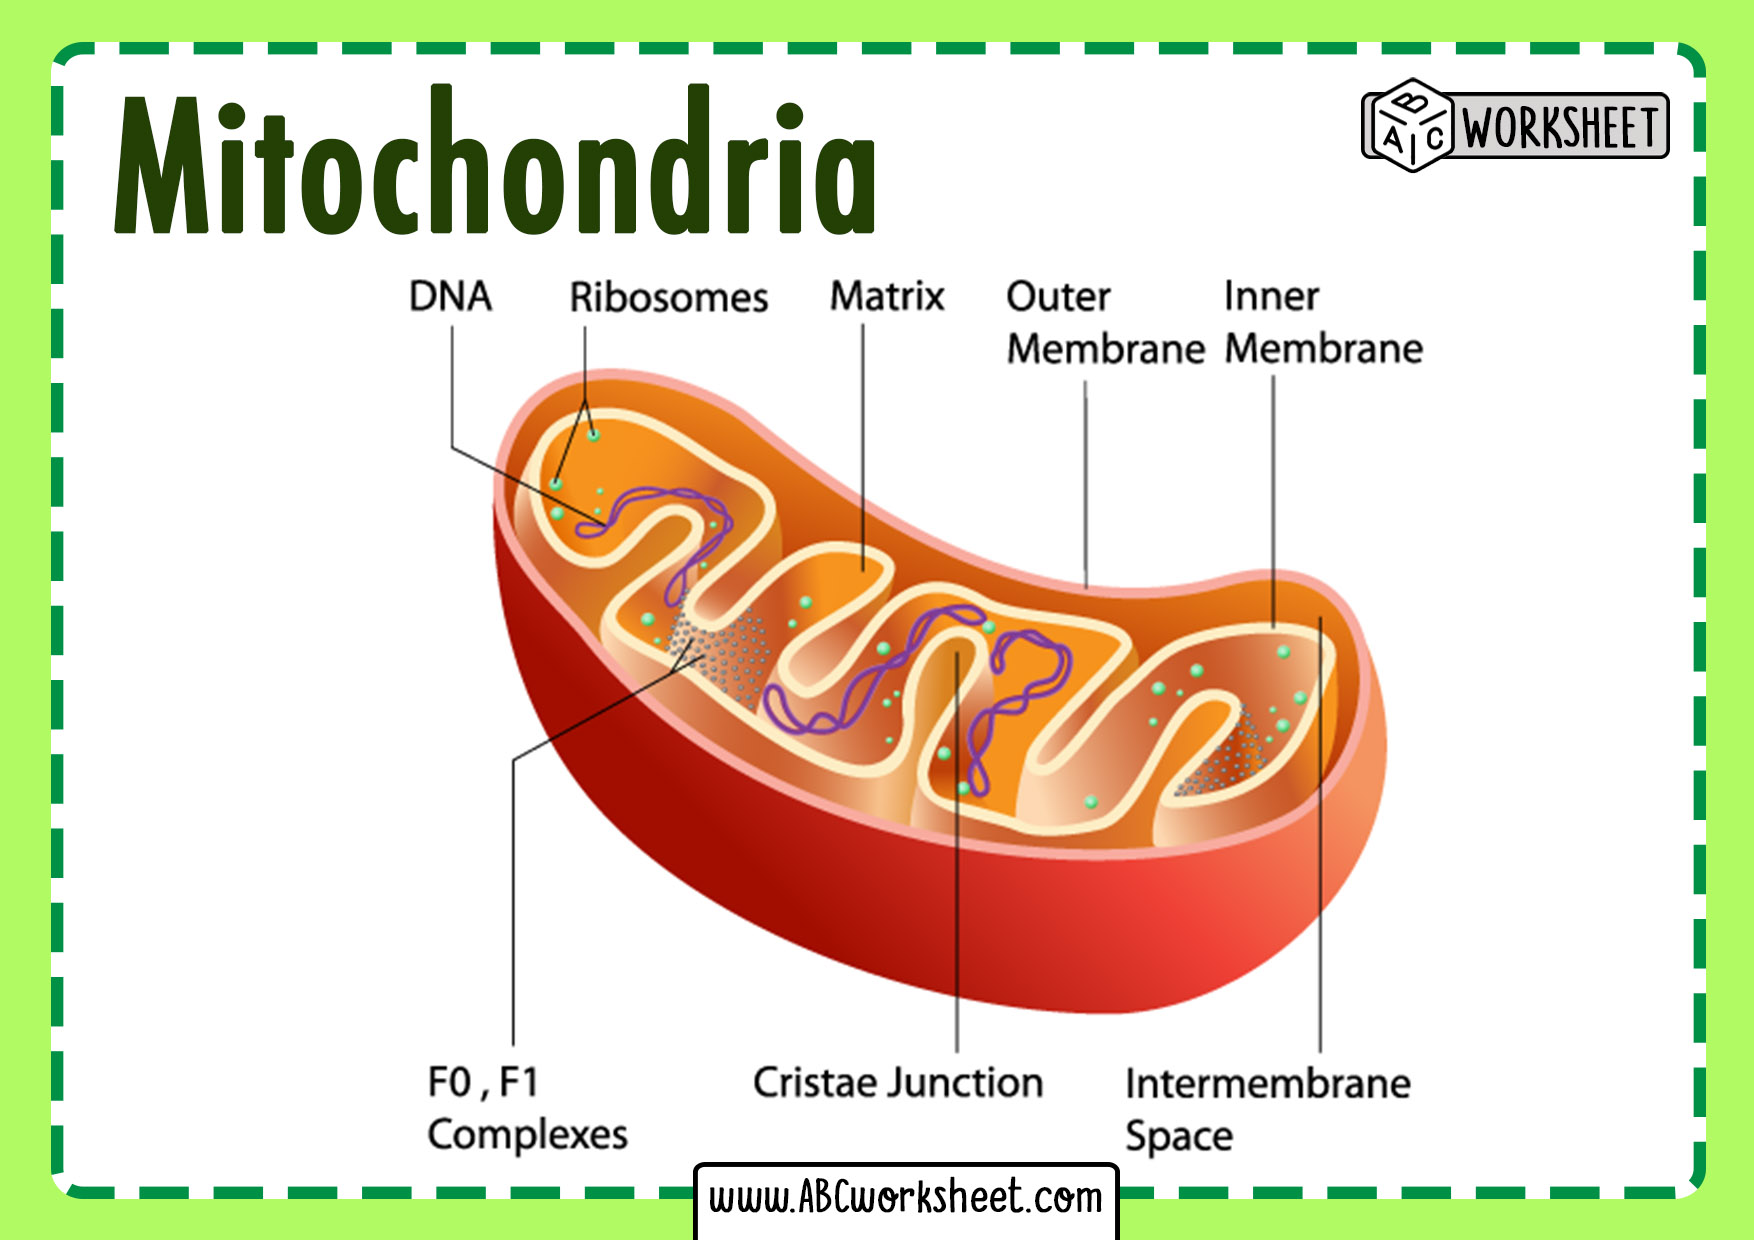 Structure and Parts of a Mitochondria